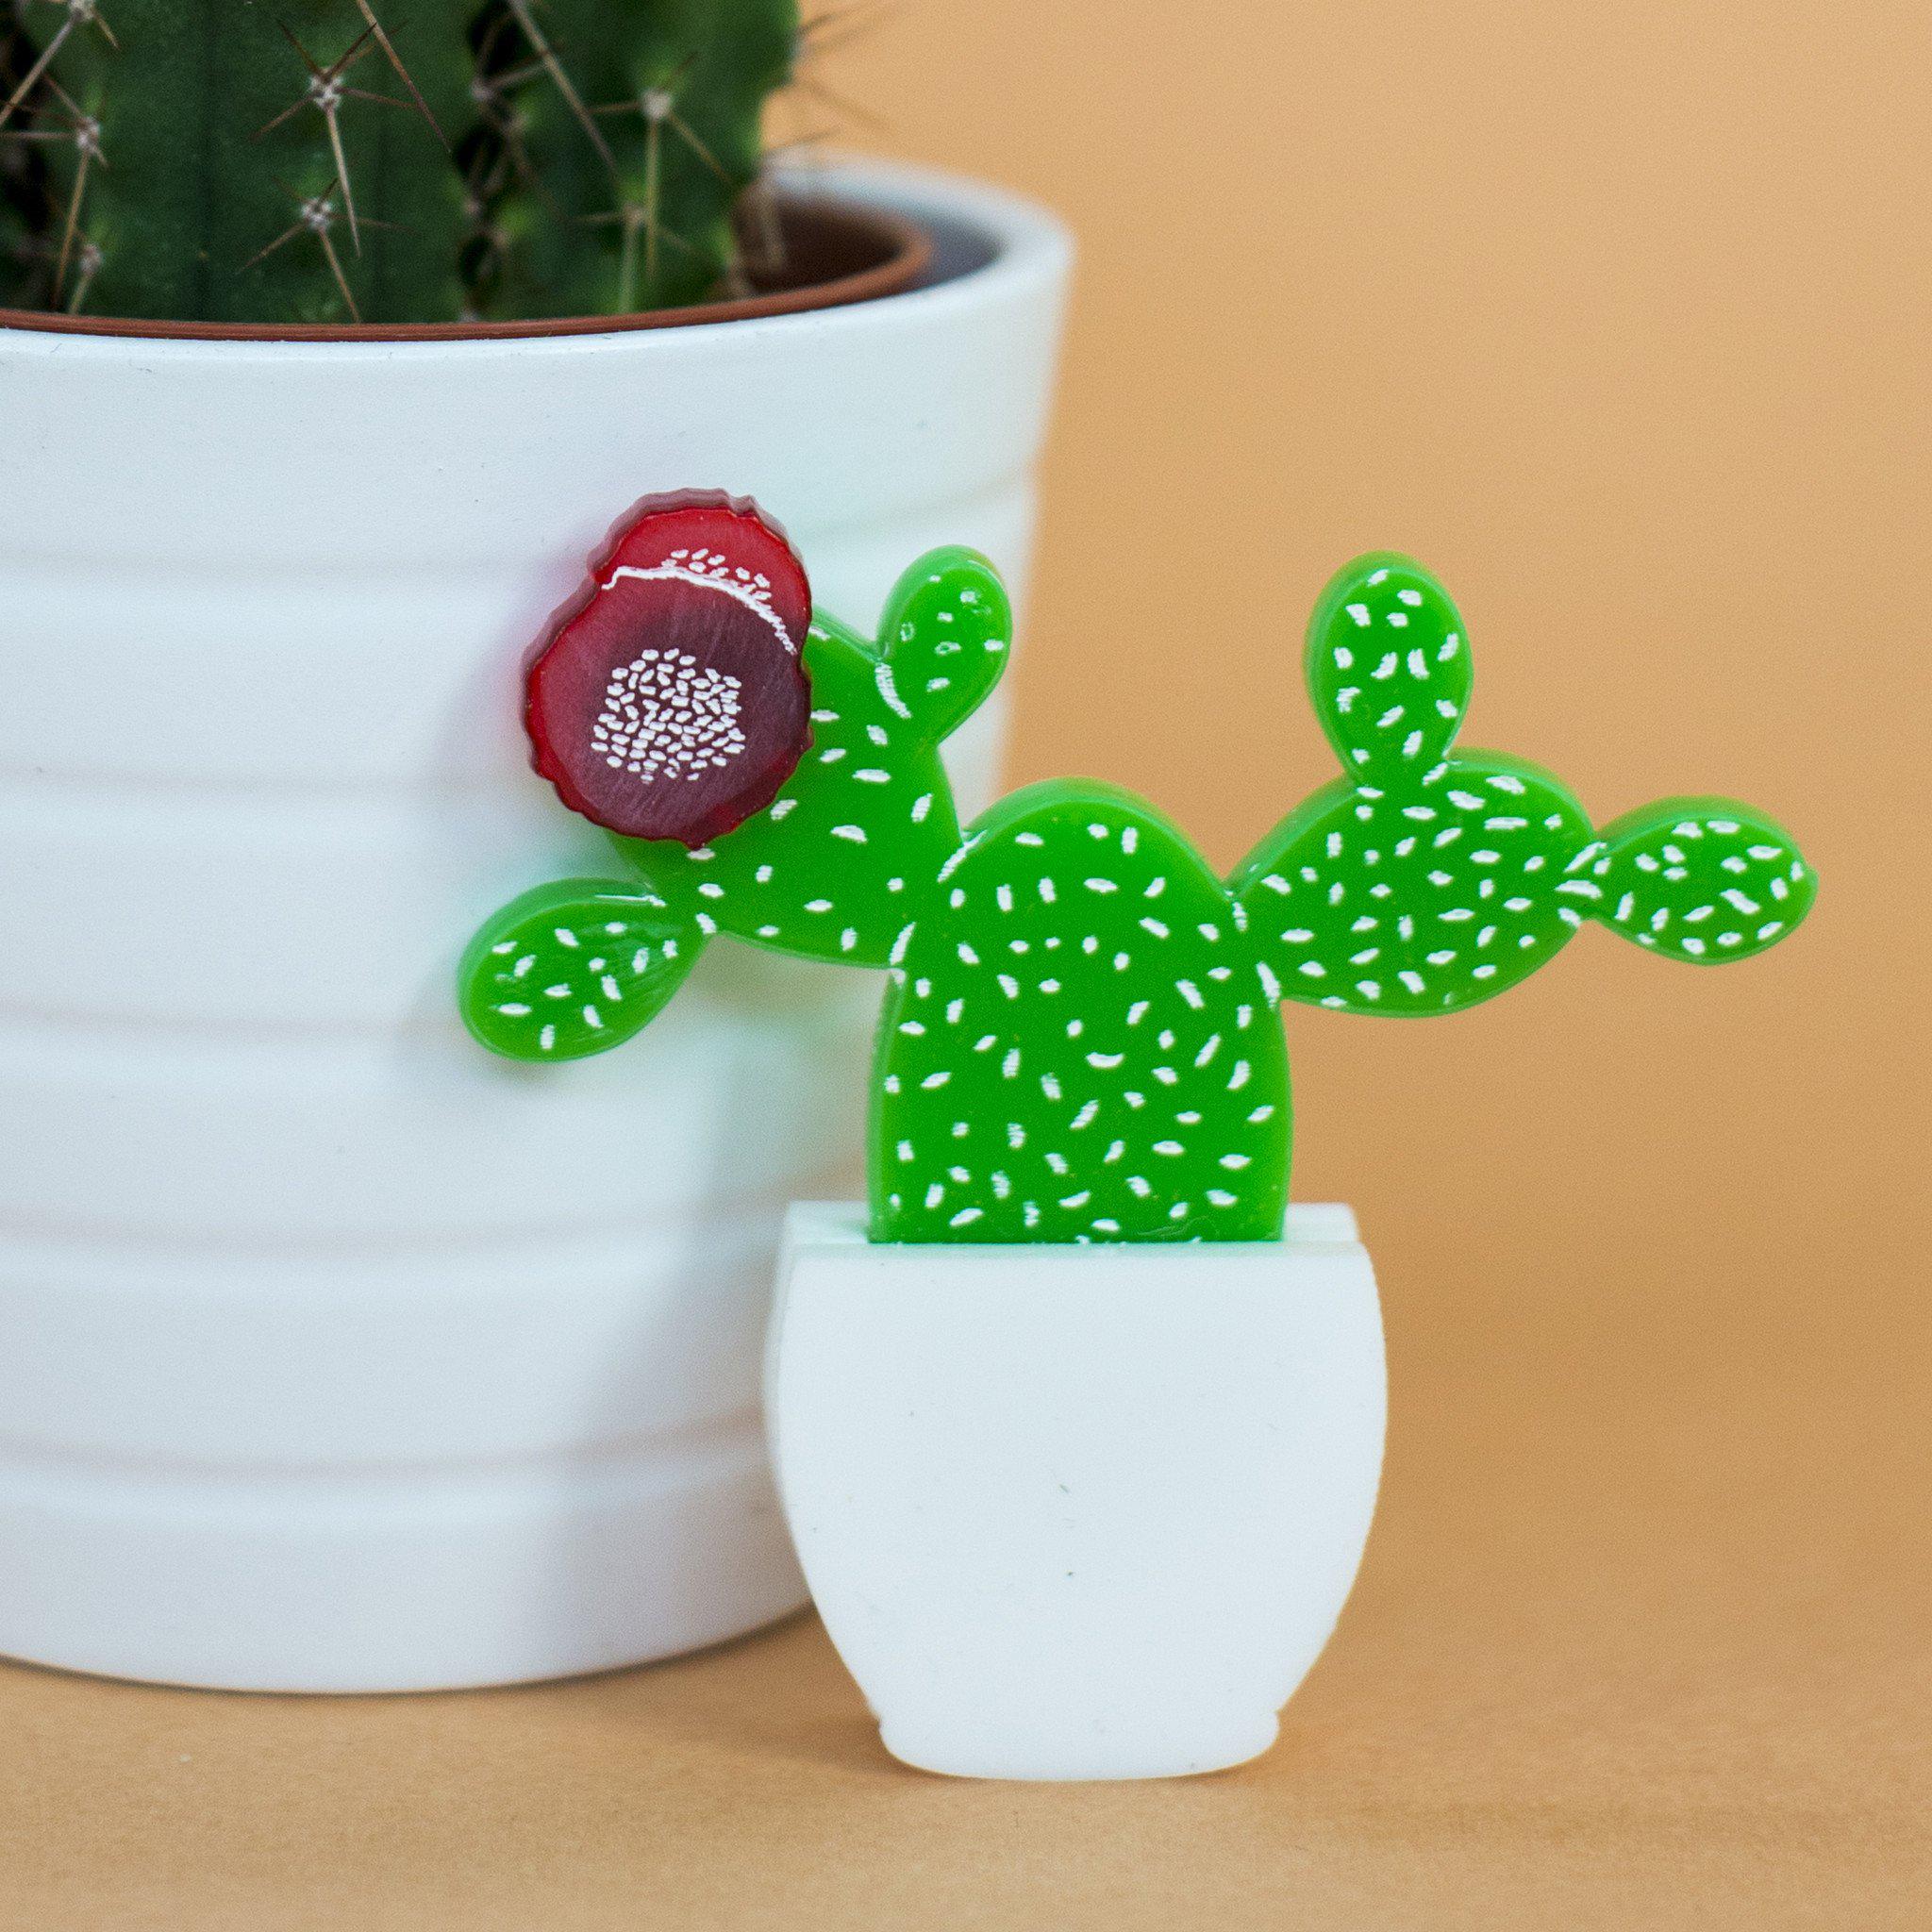 Prickly Pear Cactus Brooch - Finest Imaginary